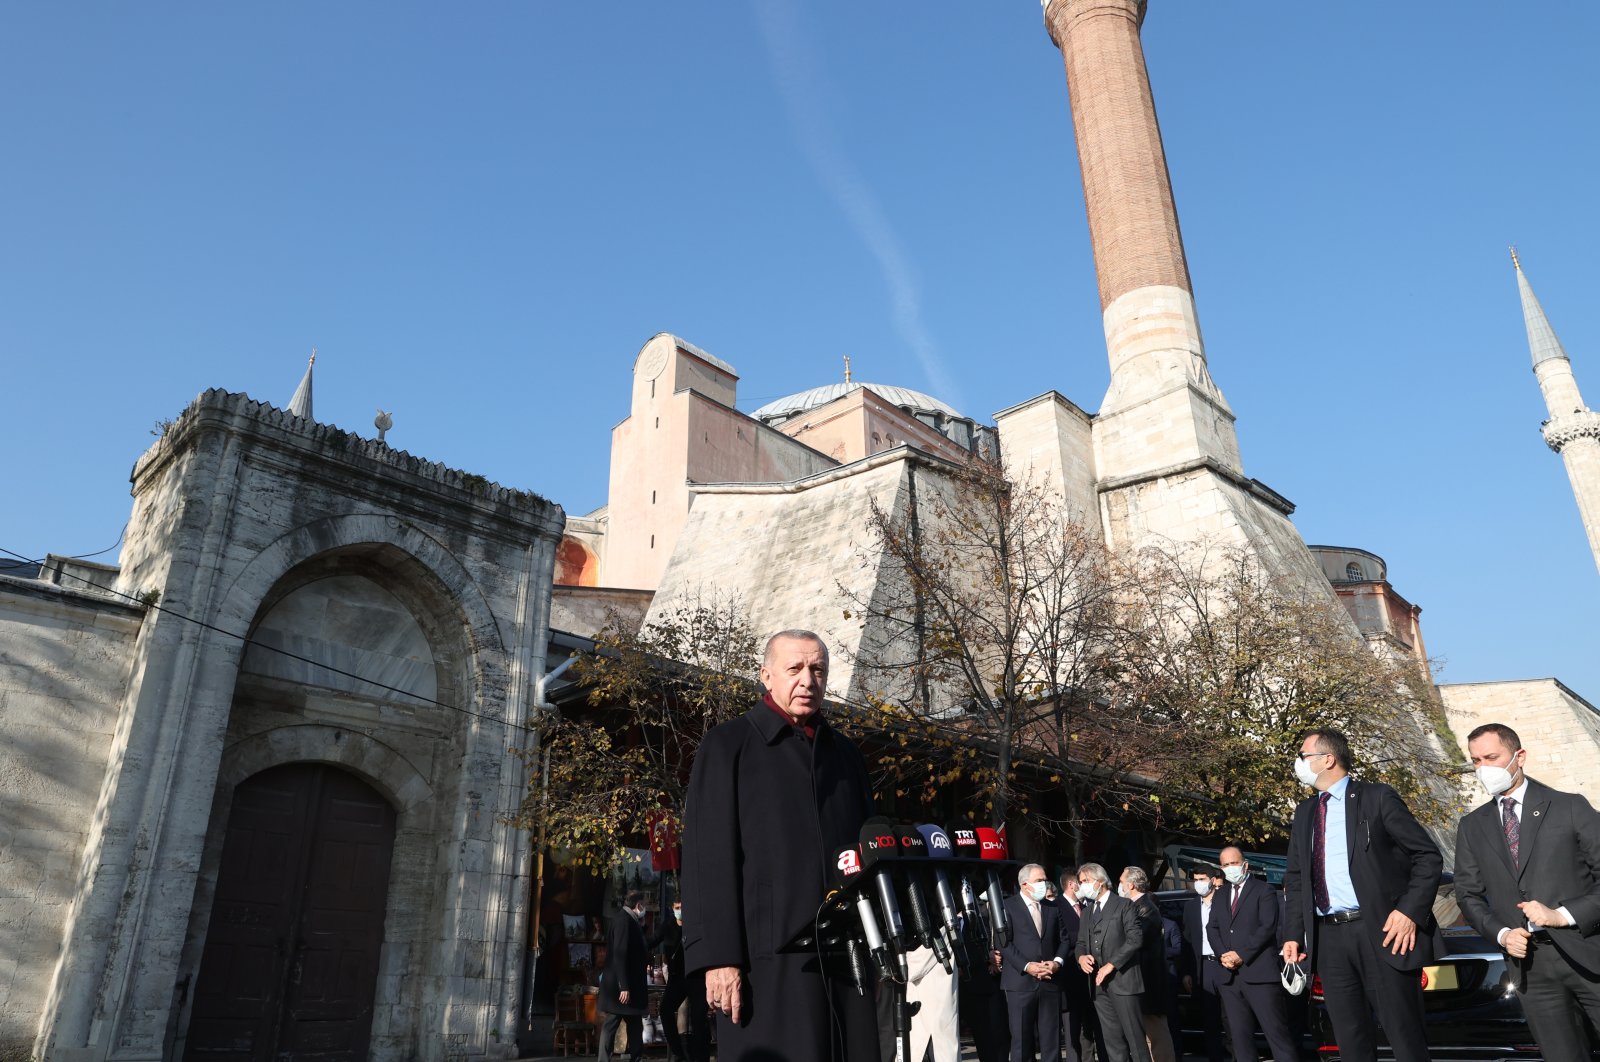 President Recep Tayyip Erdoğan speaks to reporters in front of the Hagia Sophia Grand Mosque following Friday prayers in Istanbul, Turkey, Dec. 4, 2020. (AA Photo)